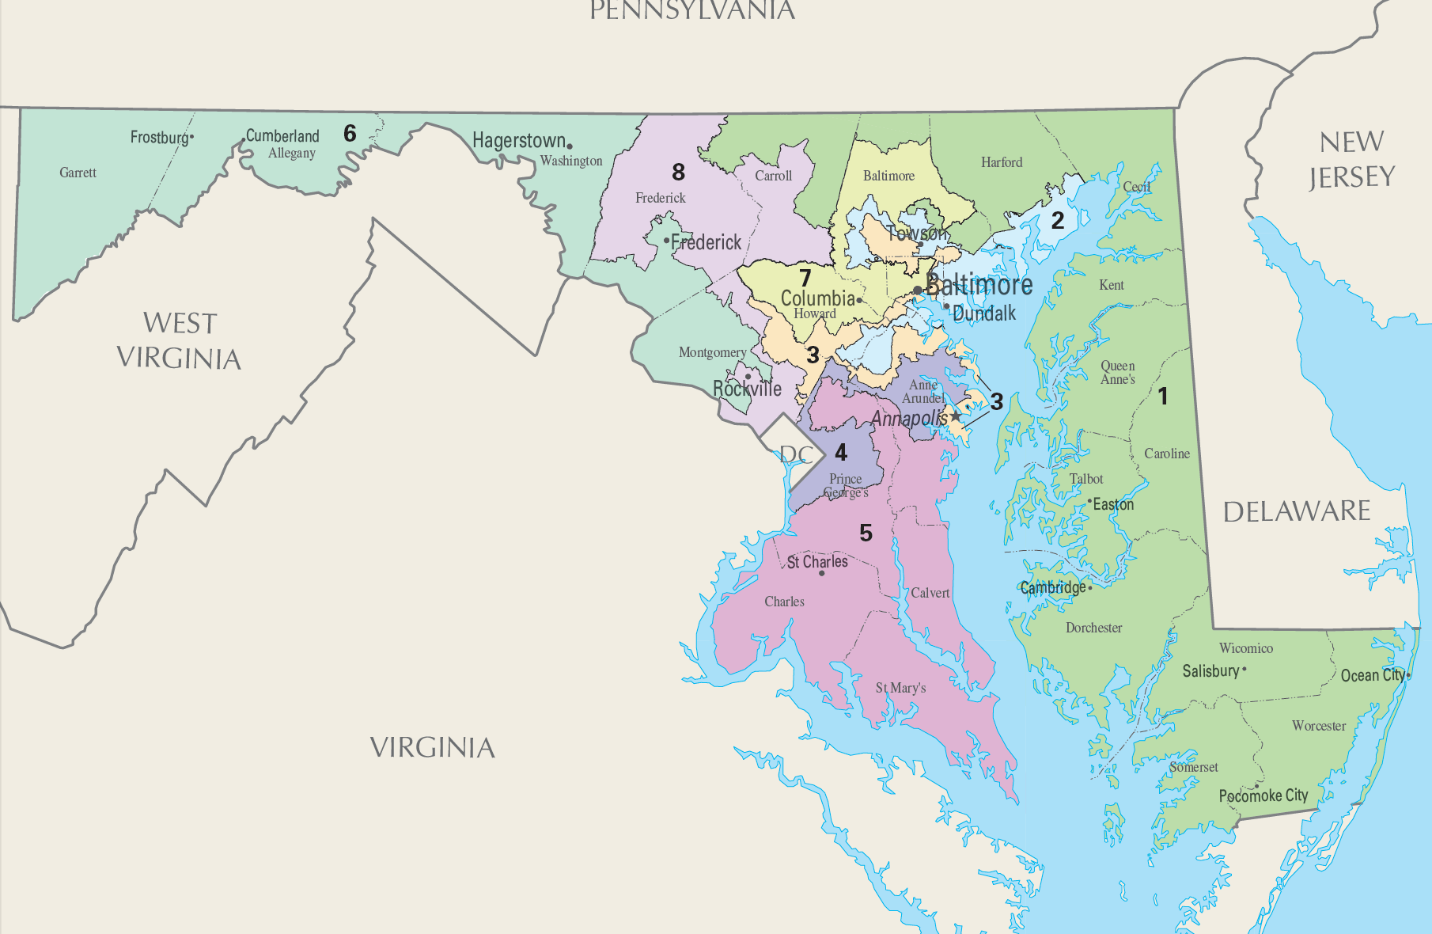 Maryland Lawmakers Introduces Bill to End Gerrymandering